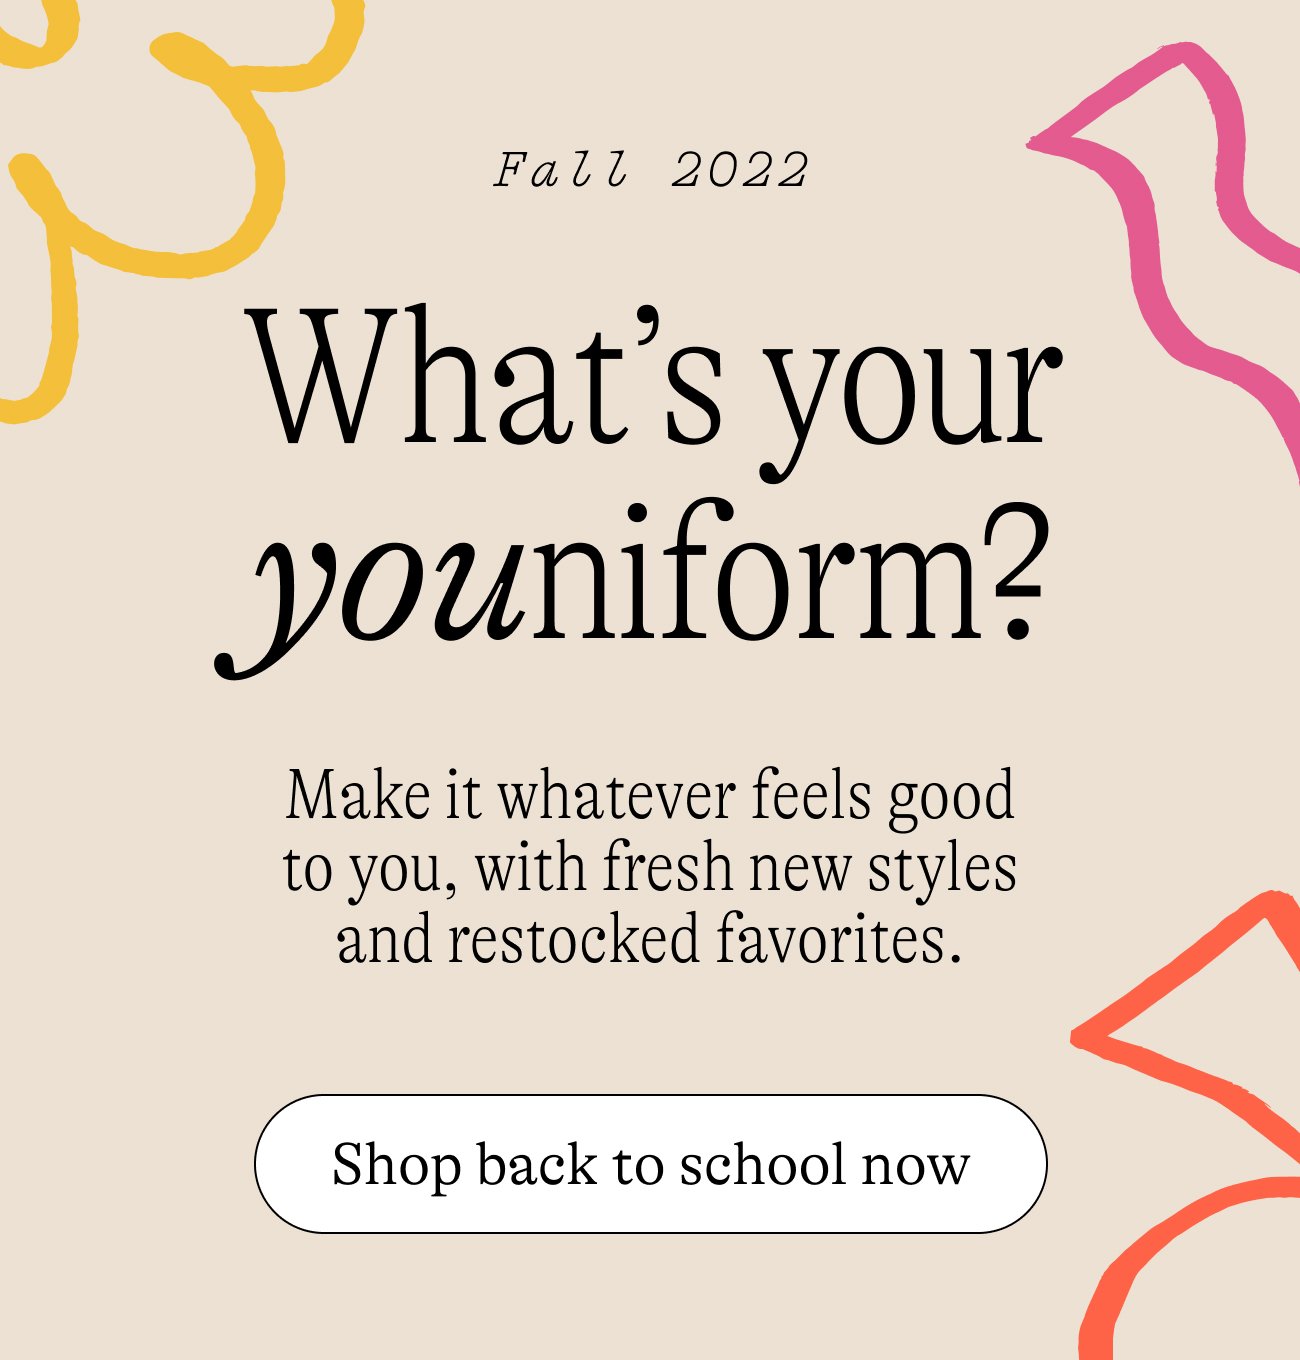 Fall 2022: What’s your youniform? Make it whatever feels good to you, with fresh new styles and restocked favorites.